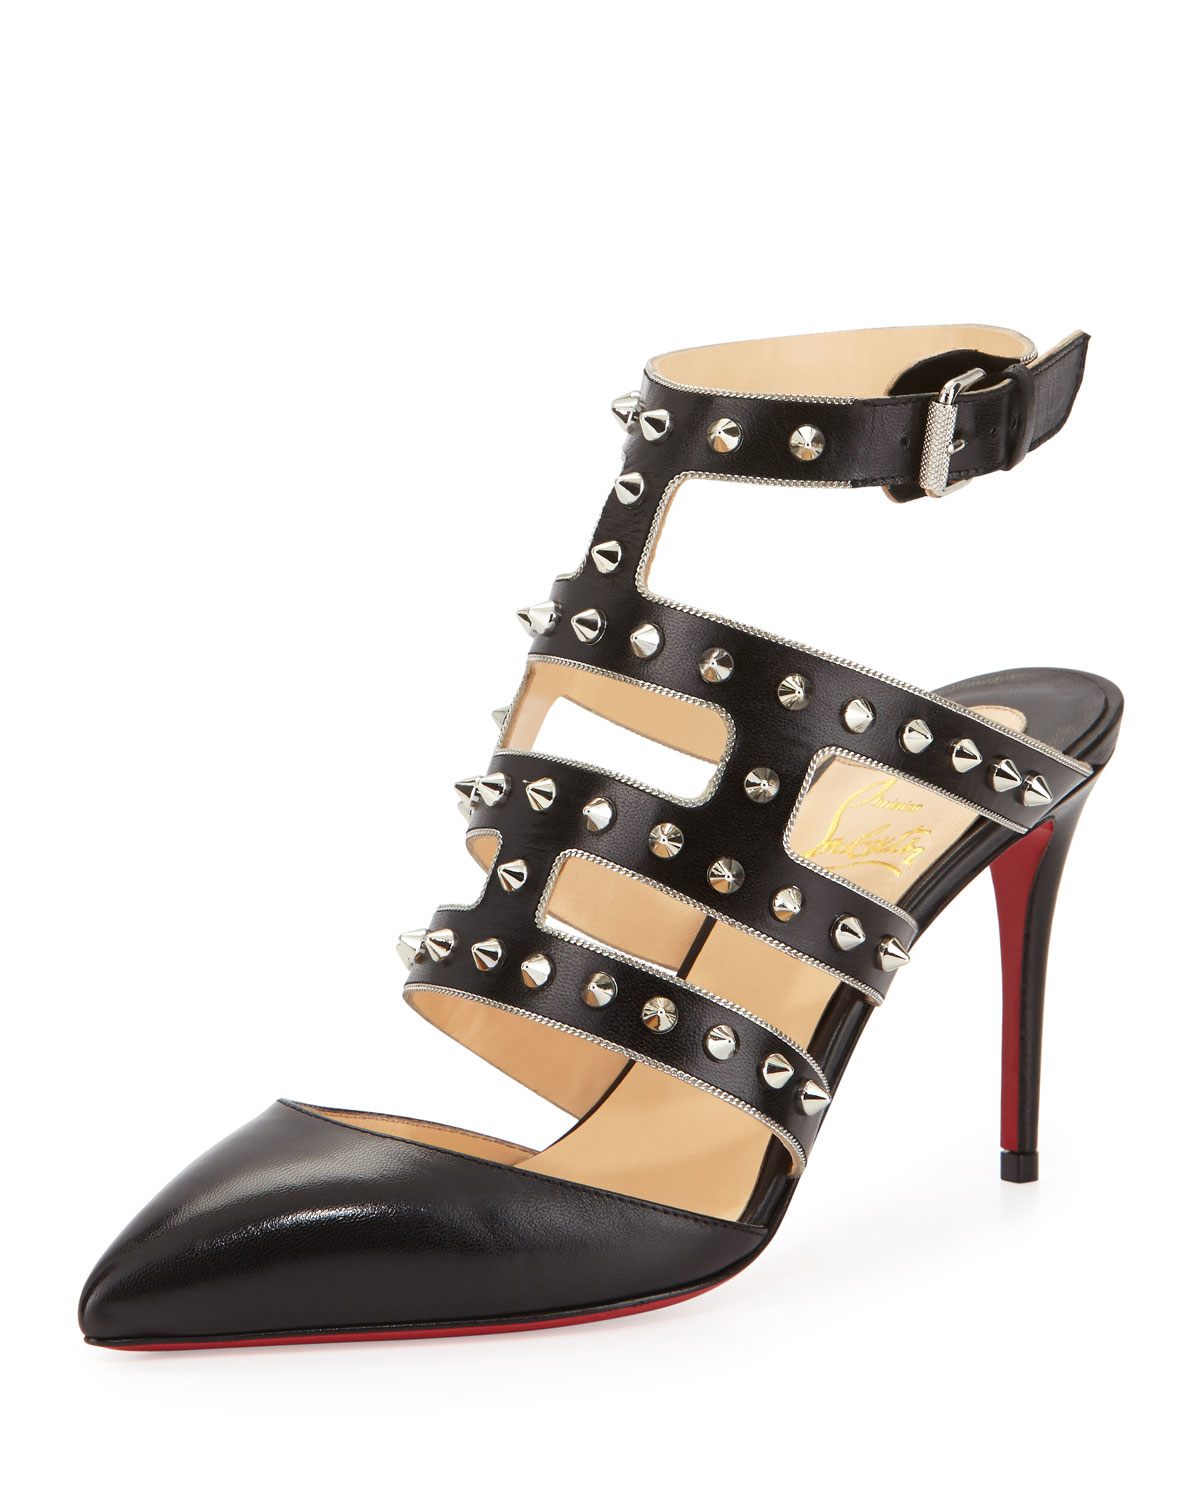 christian louboutin men online shop - Christian louboutin Tchikaboum Studded Leather Cage Pumps in Black ...